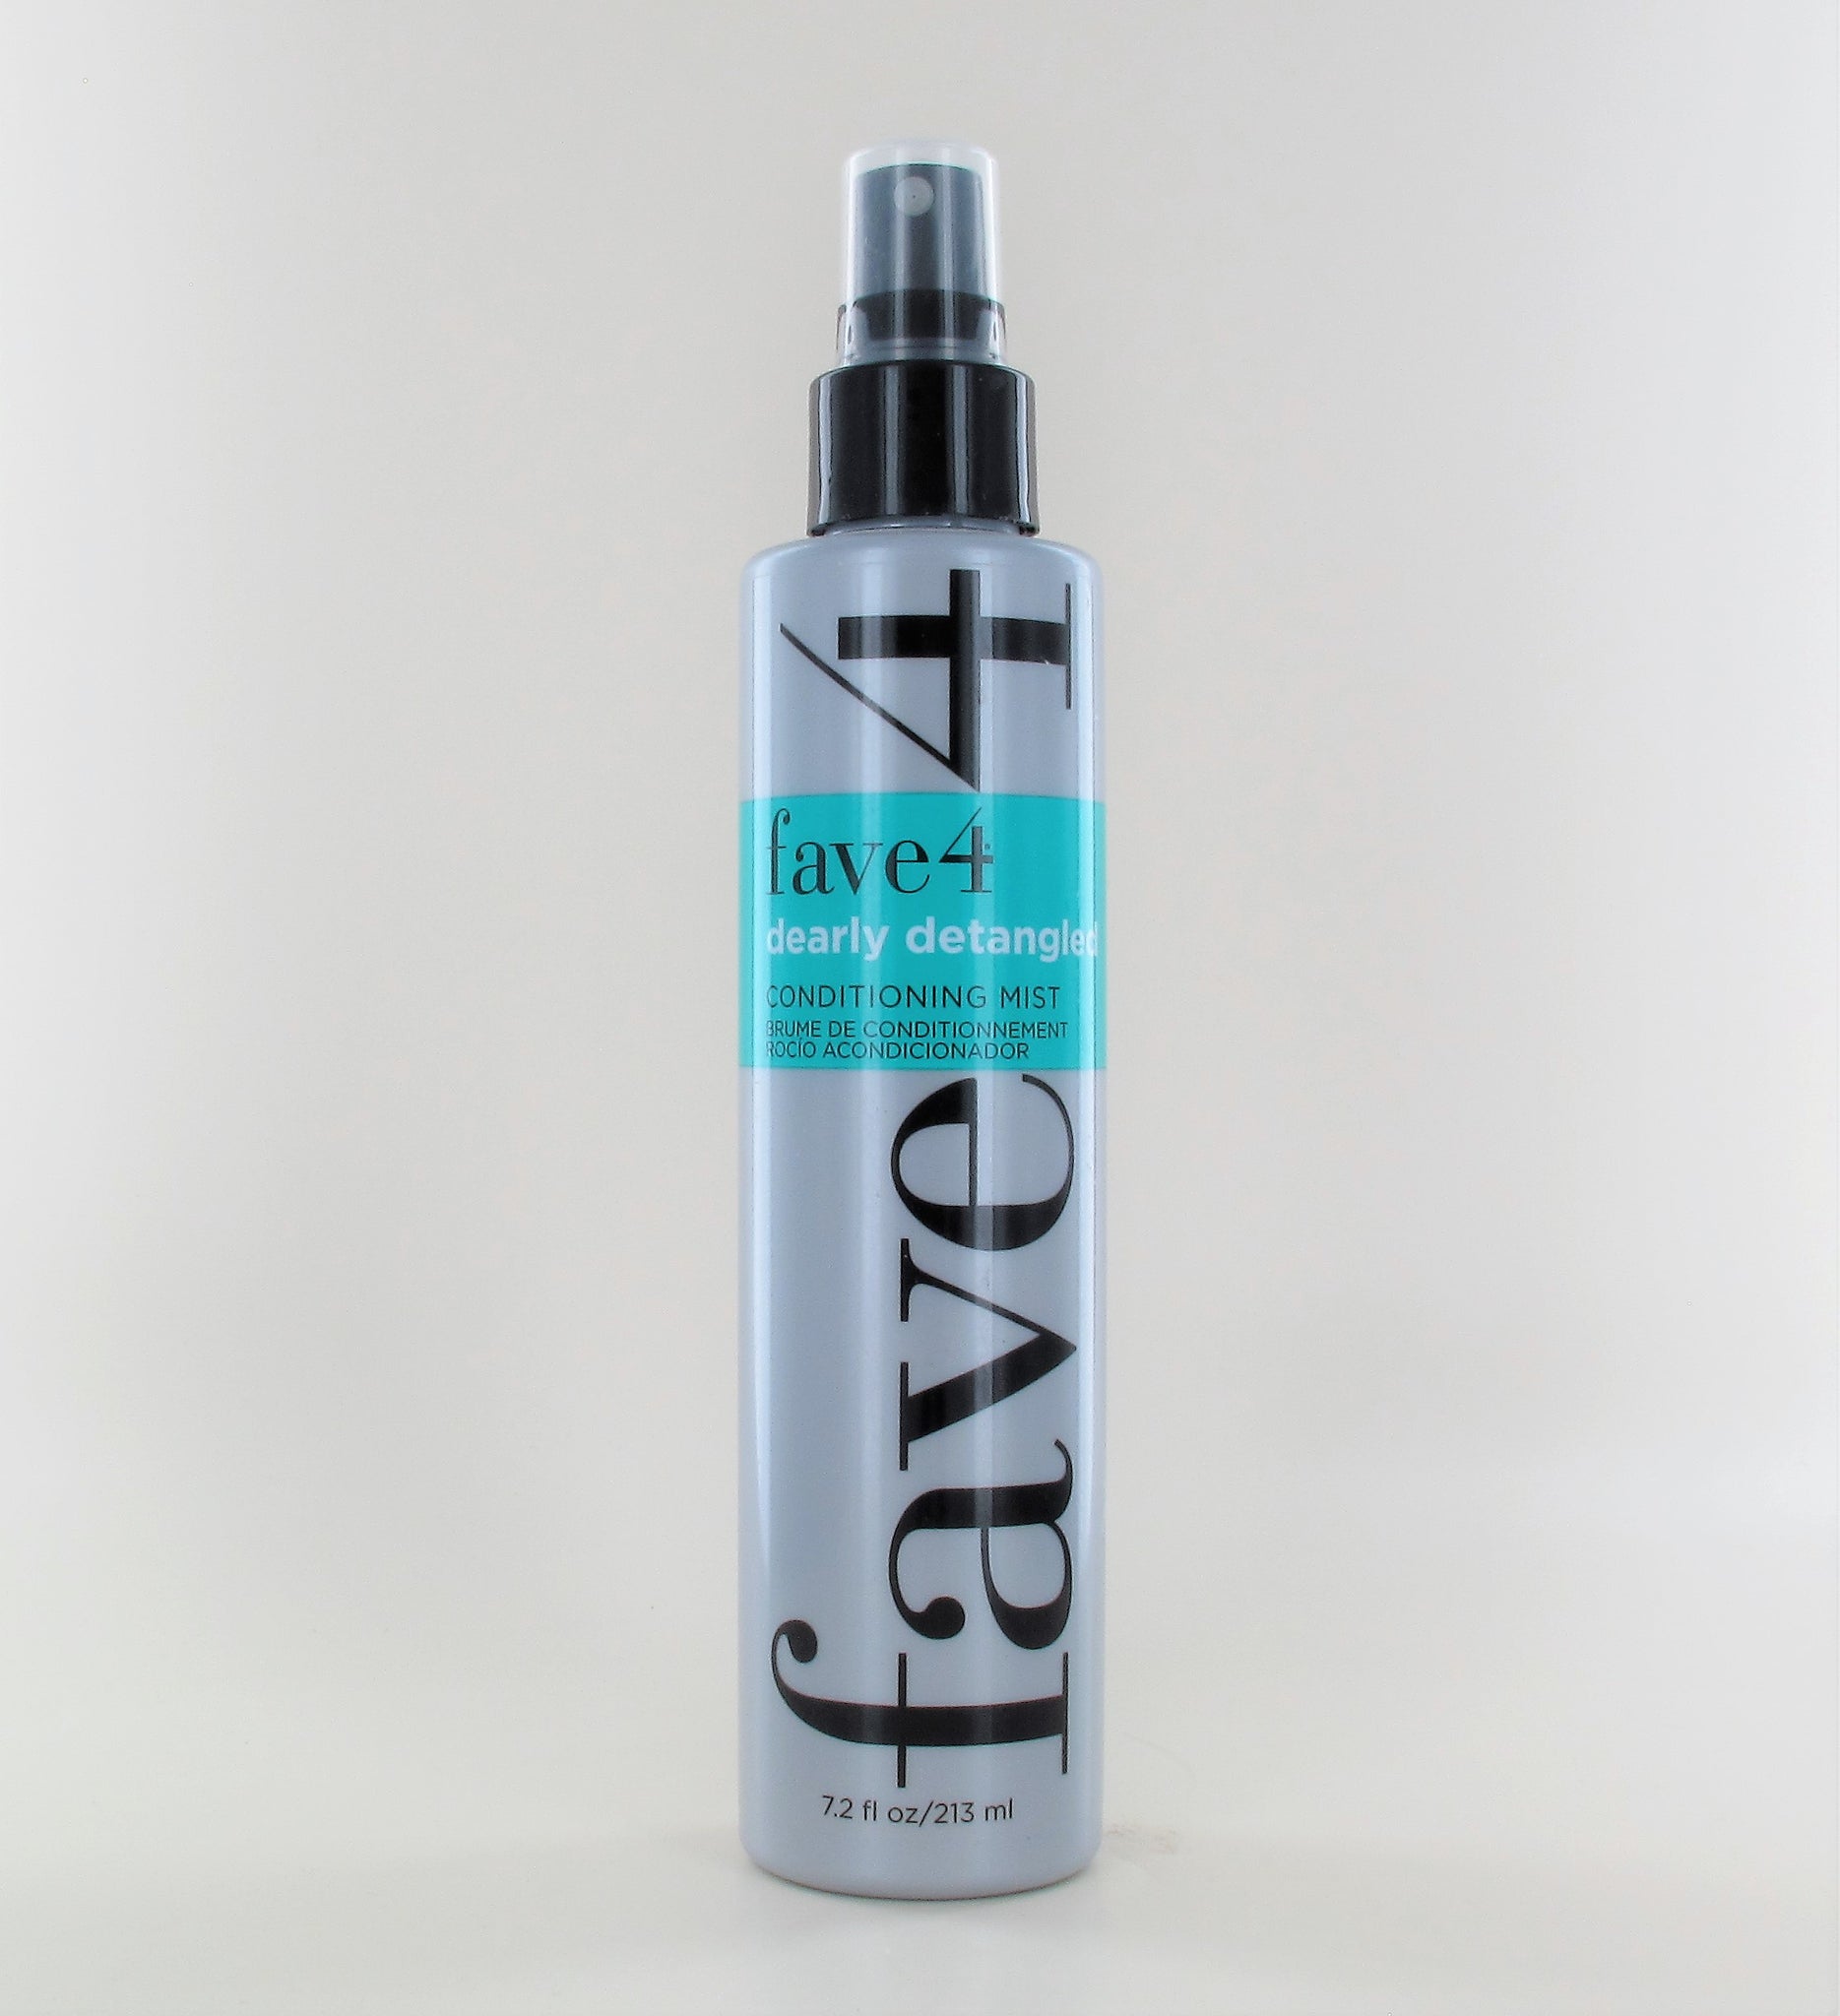 FAVE 4 Dearly Detangled Conditioning Mist 7.2 oz